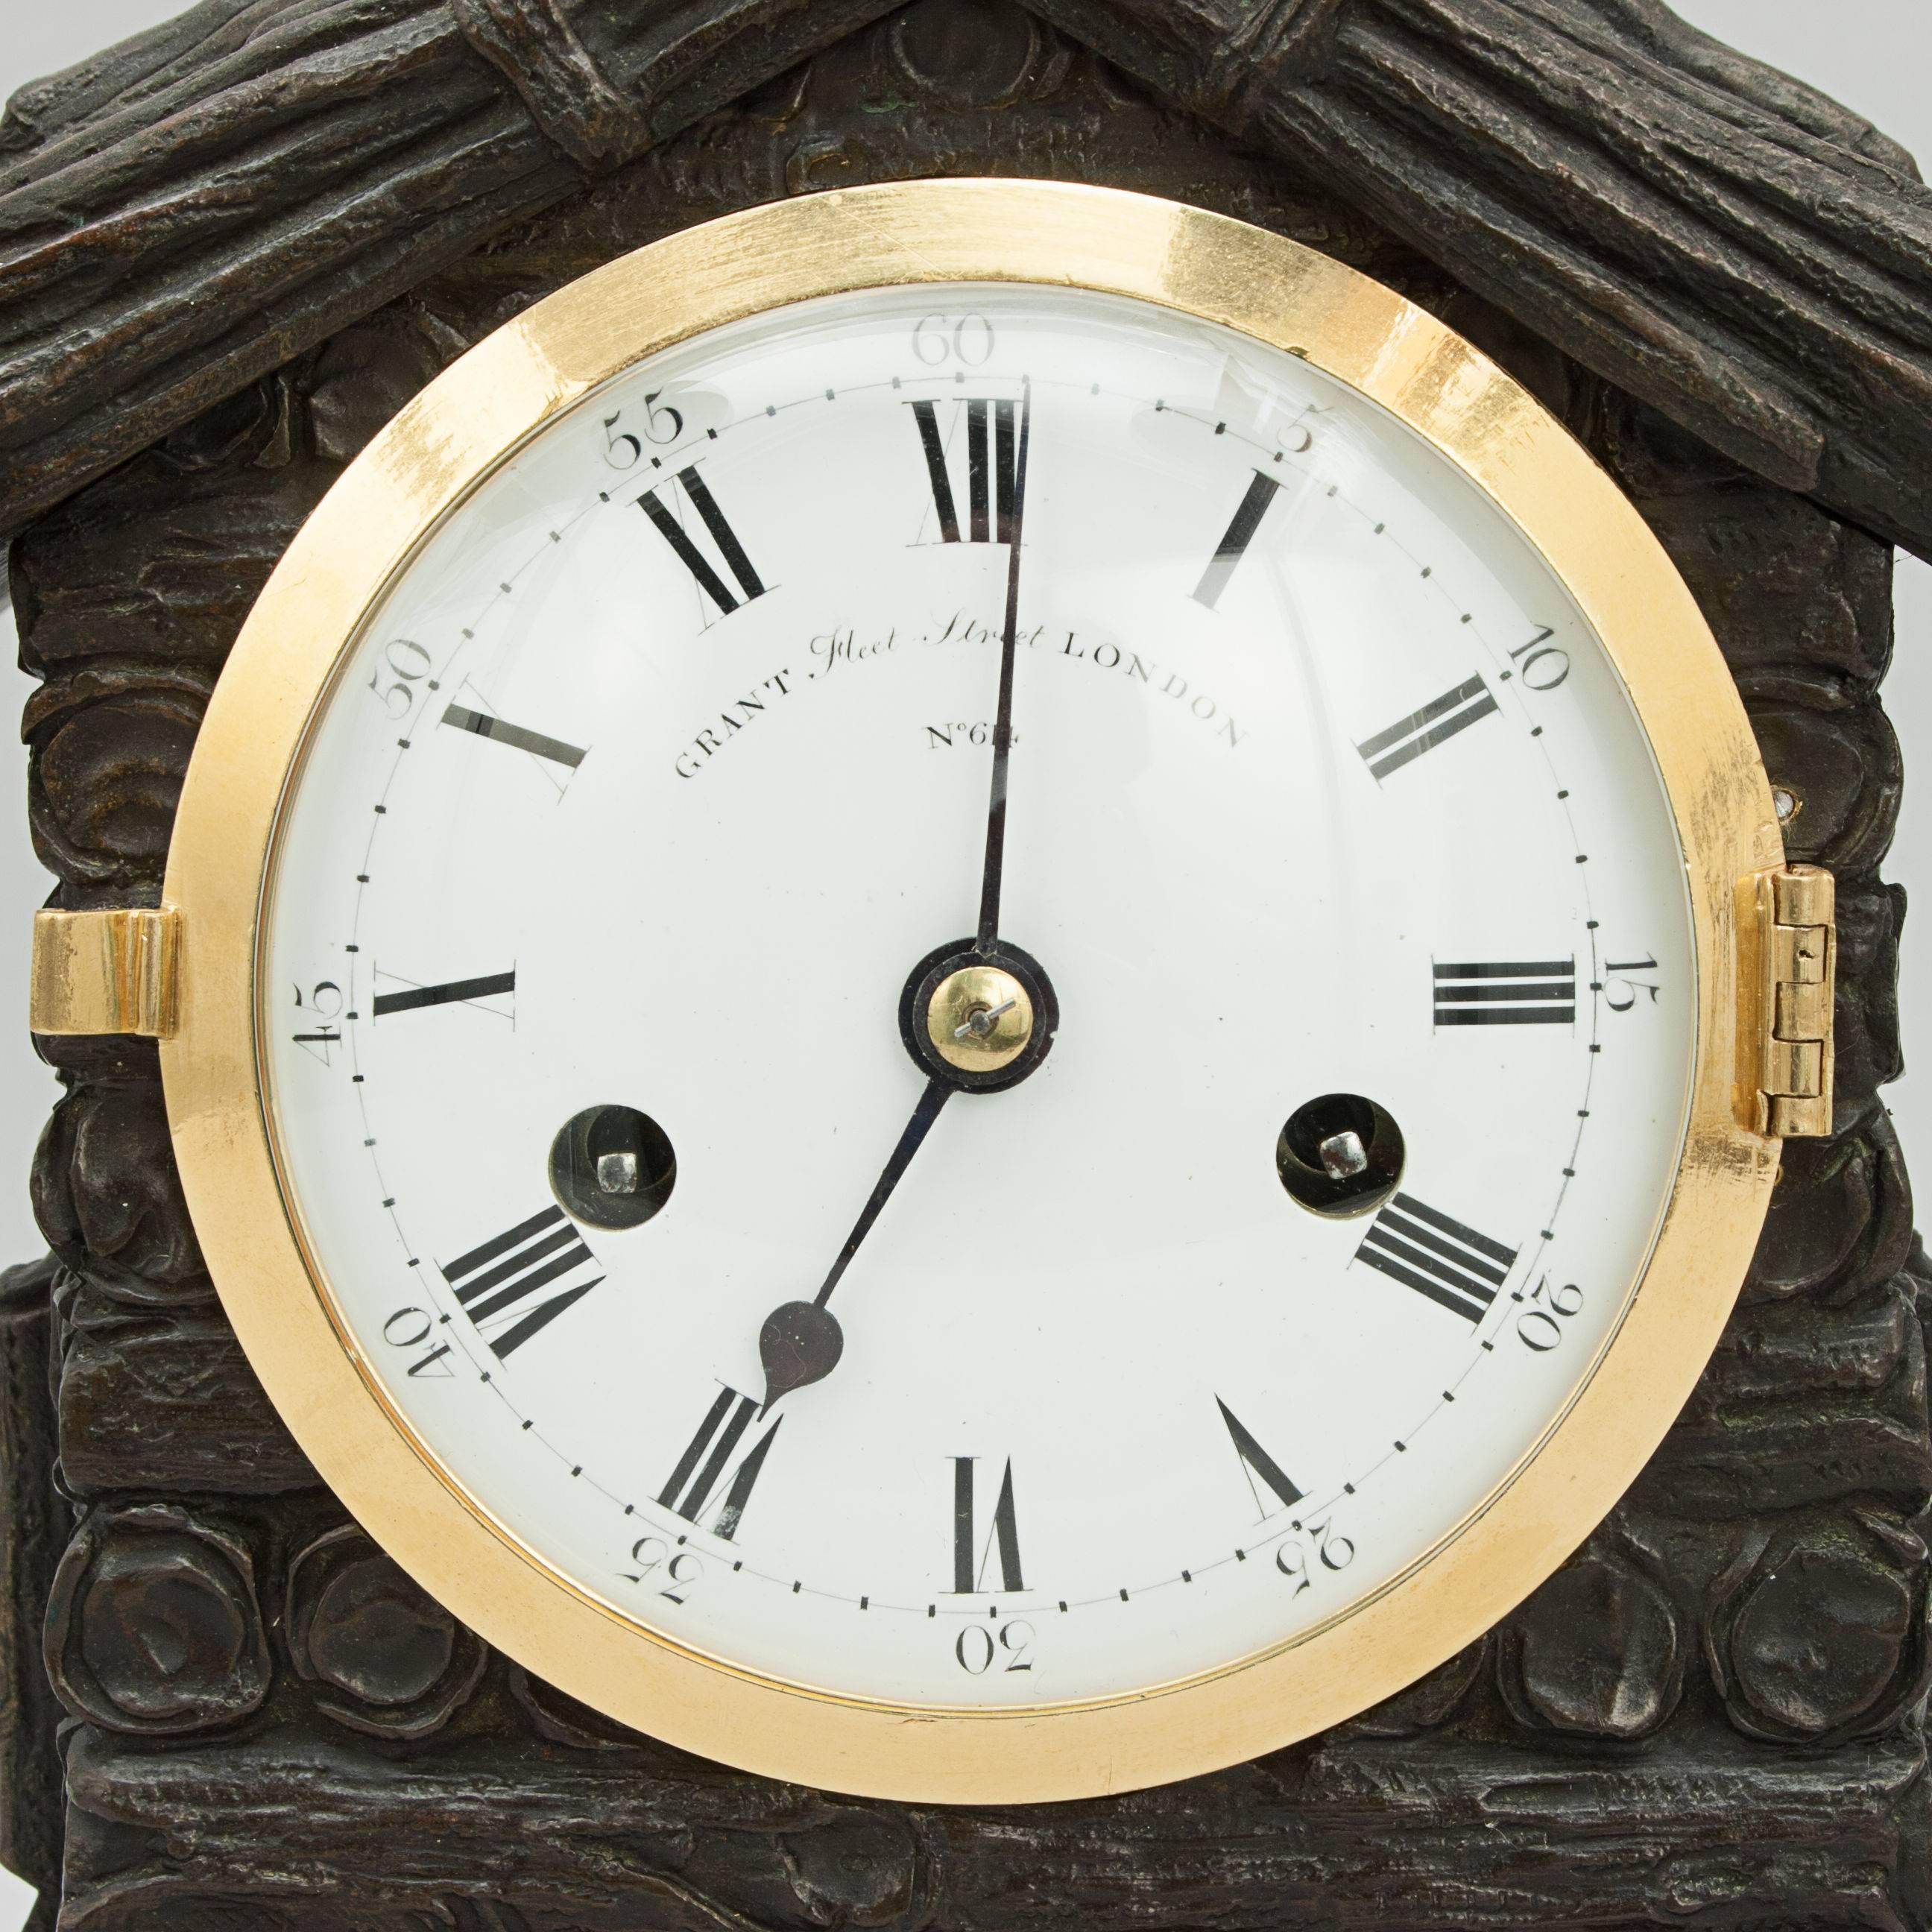 Mantel clock by Grant.
An unusual mantel clock with the heavy bronze case in the form of a log cabin. The clock workings by John Grant, Fleet Street, London. The 4' diameter white enamel bowed dial, with black Roman numerals for the hours and